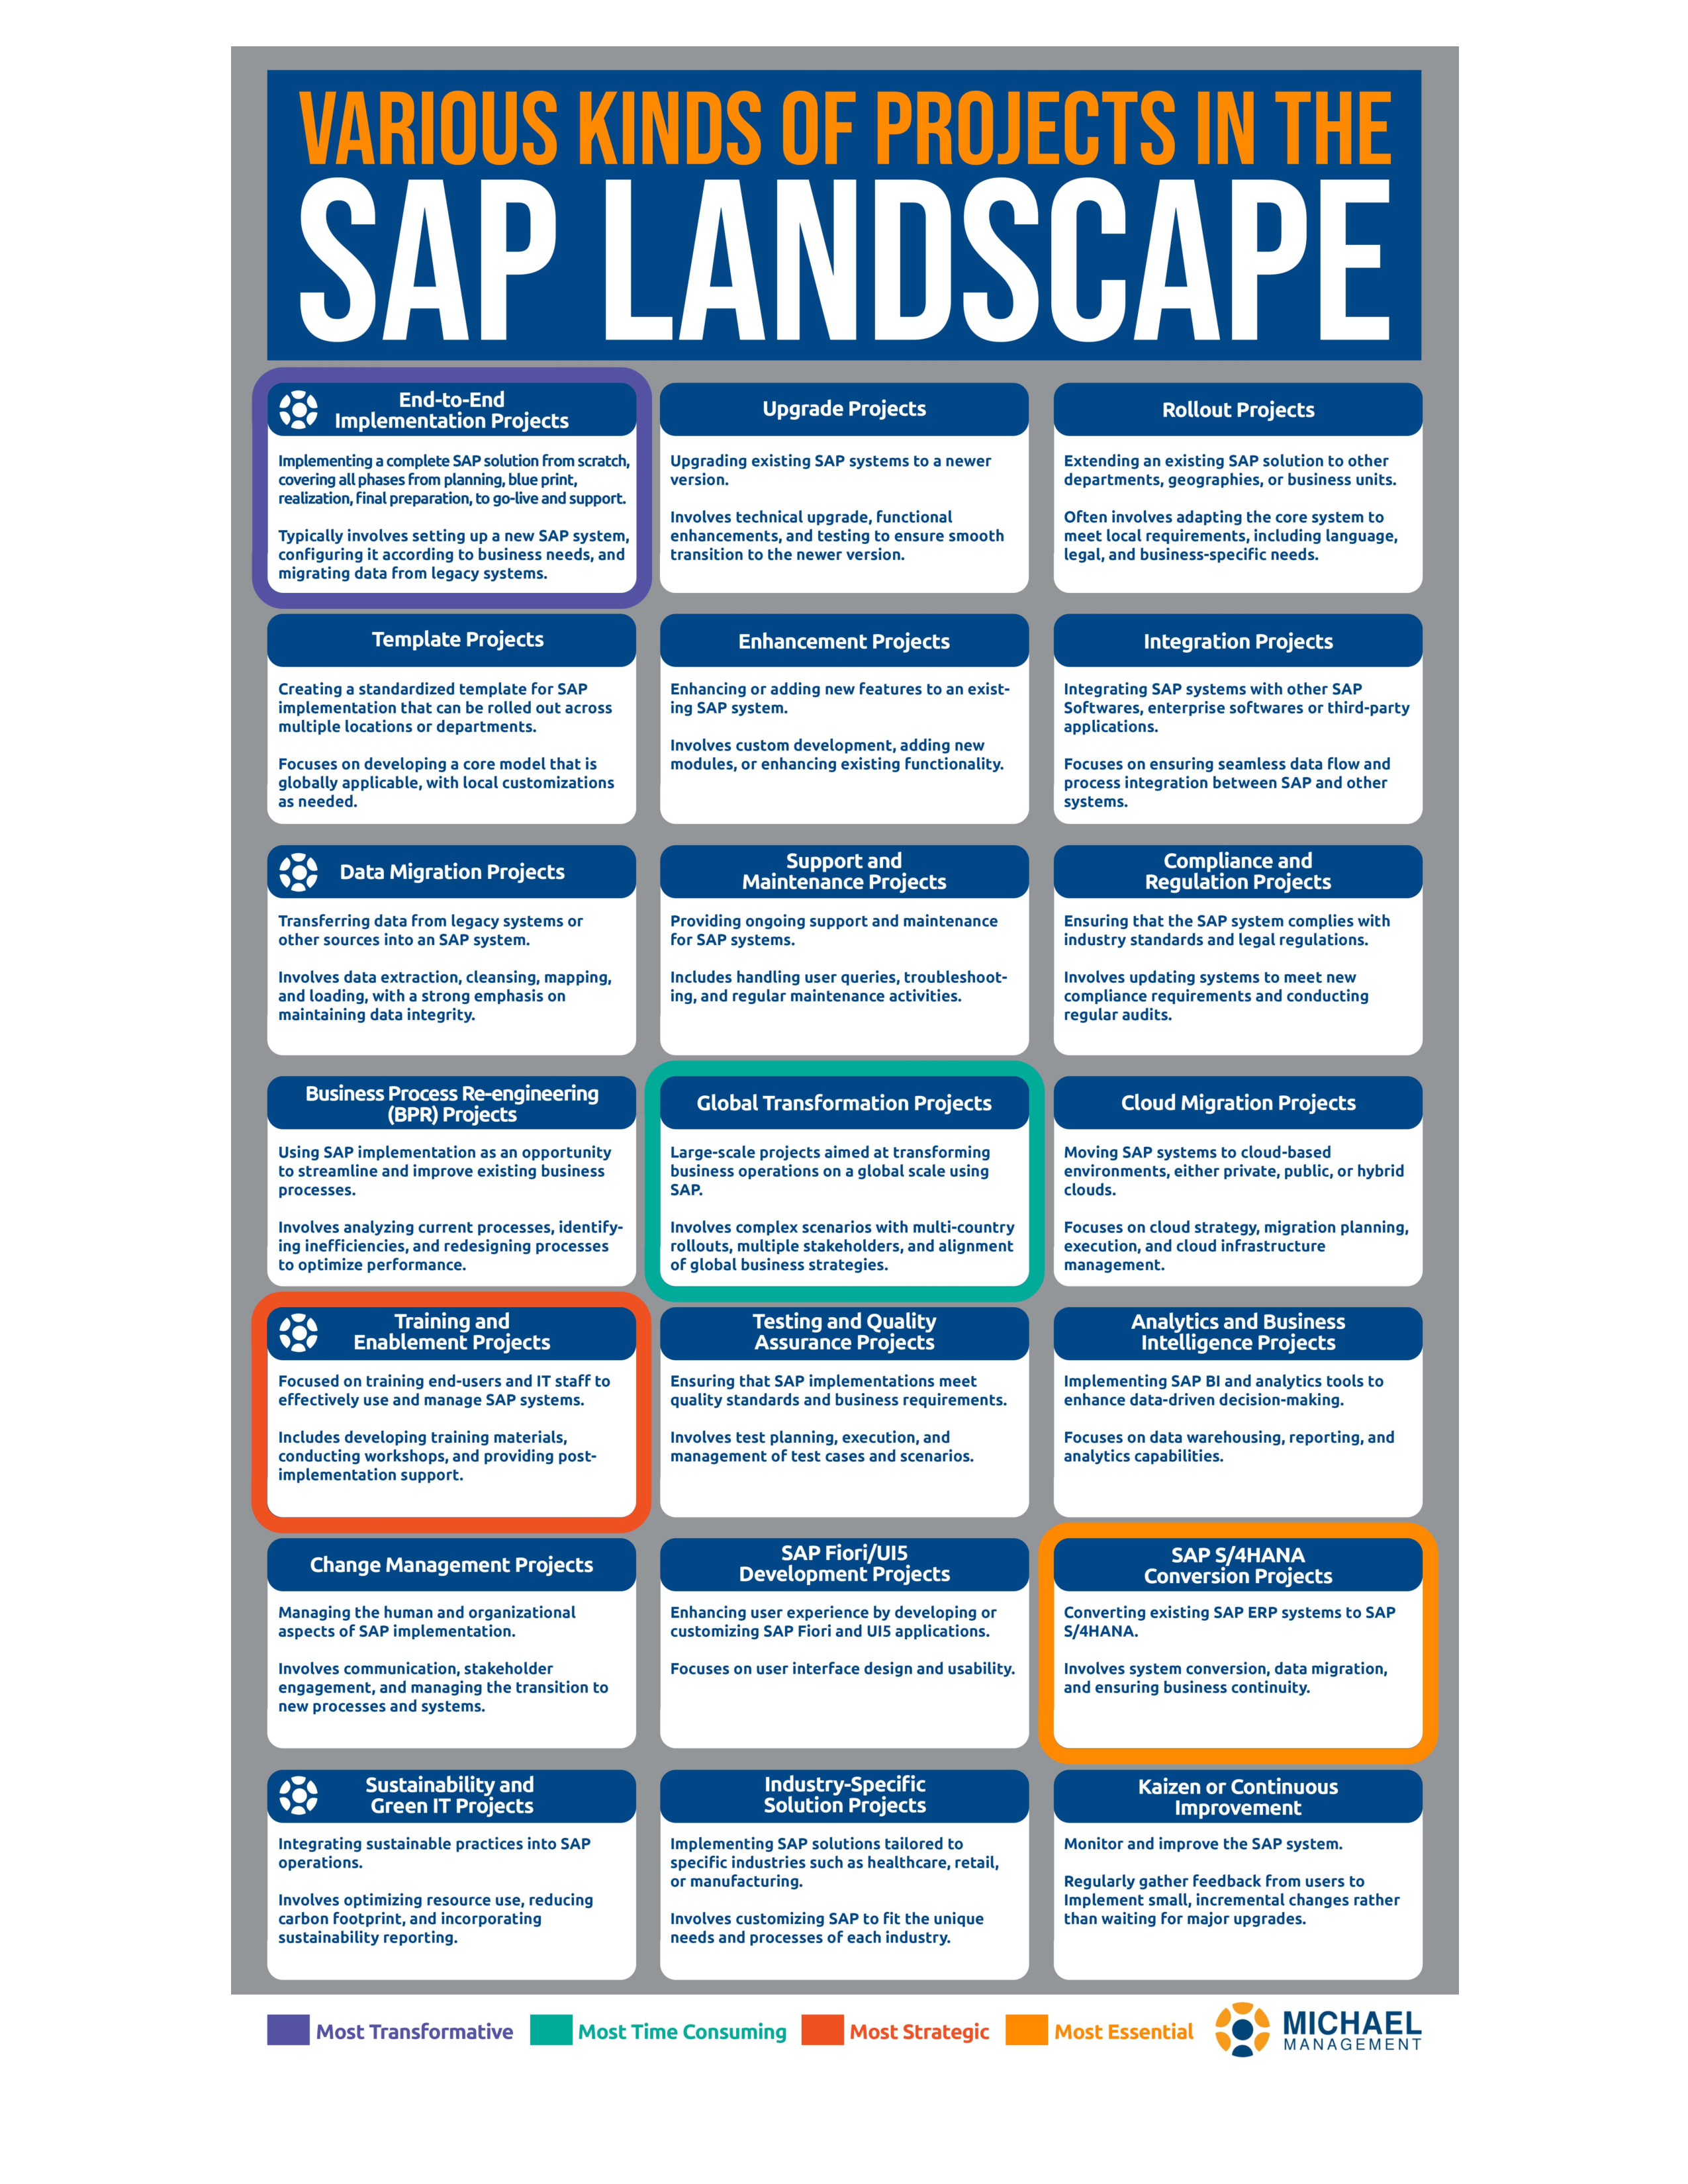 < Types of Projects in the SAP Landscape